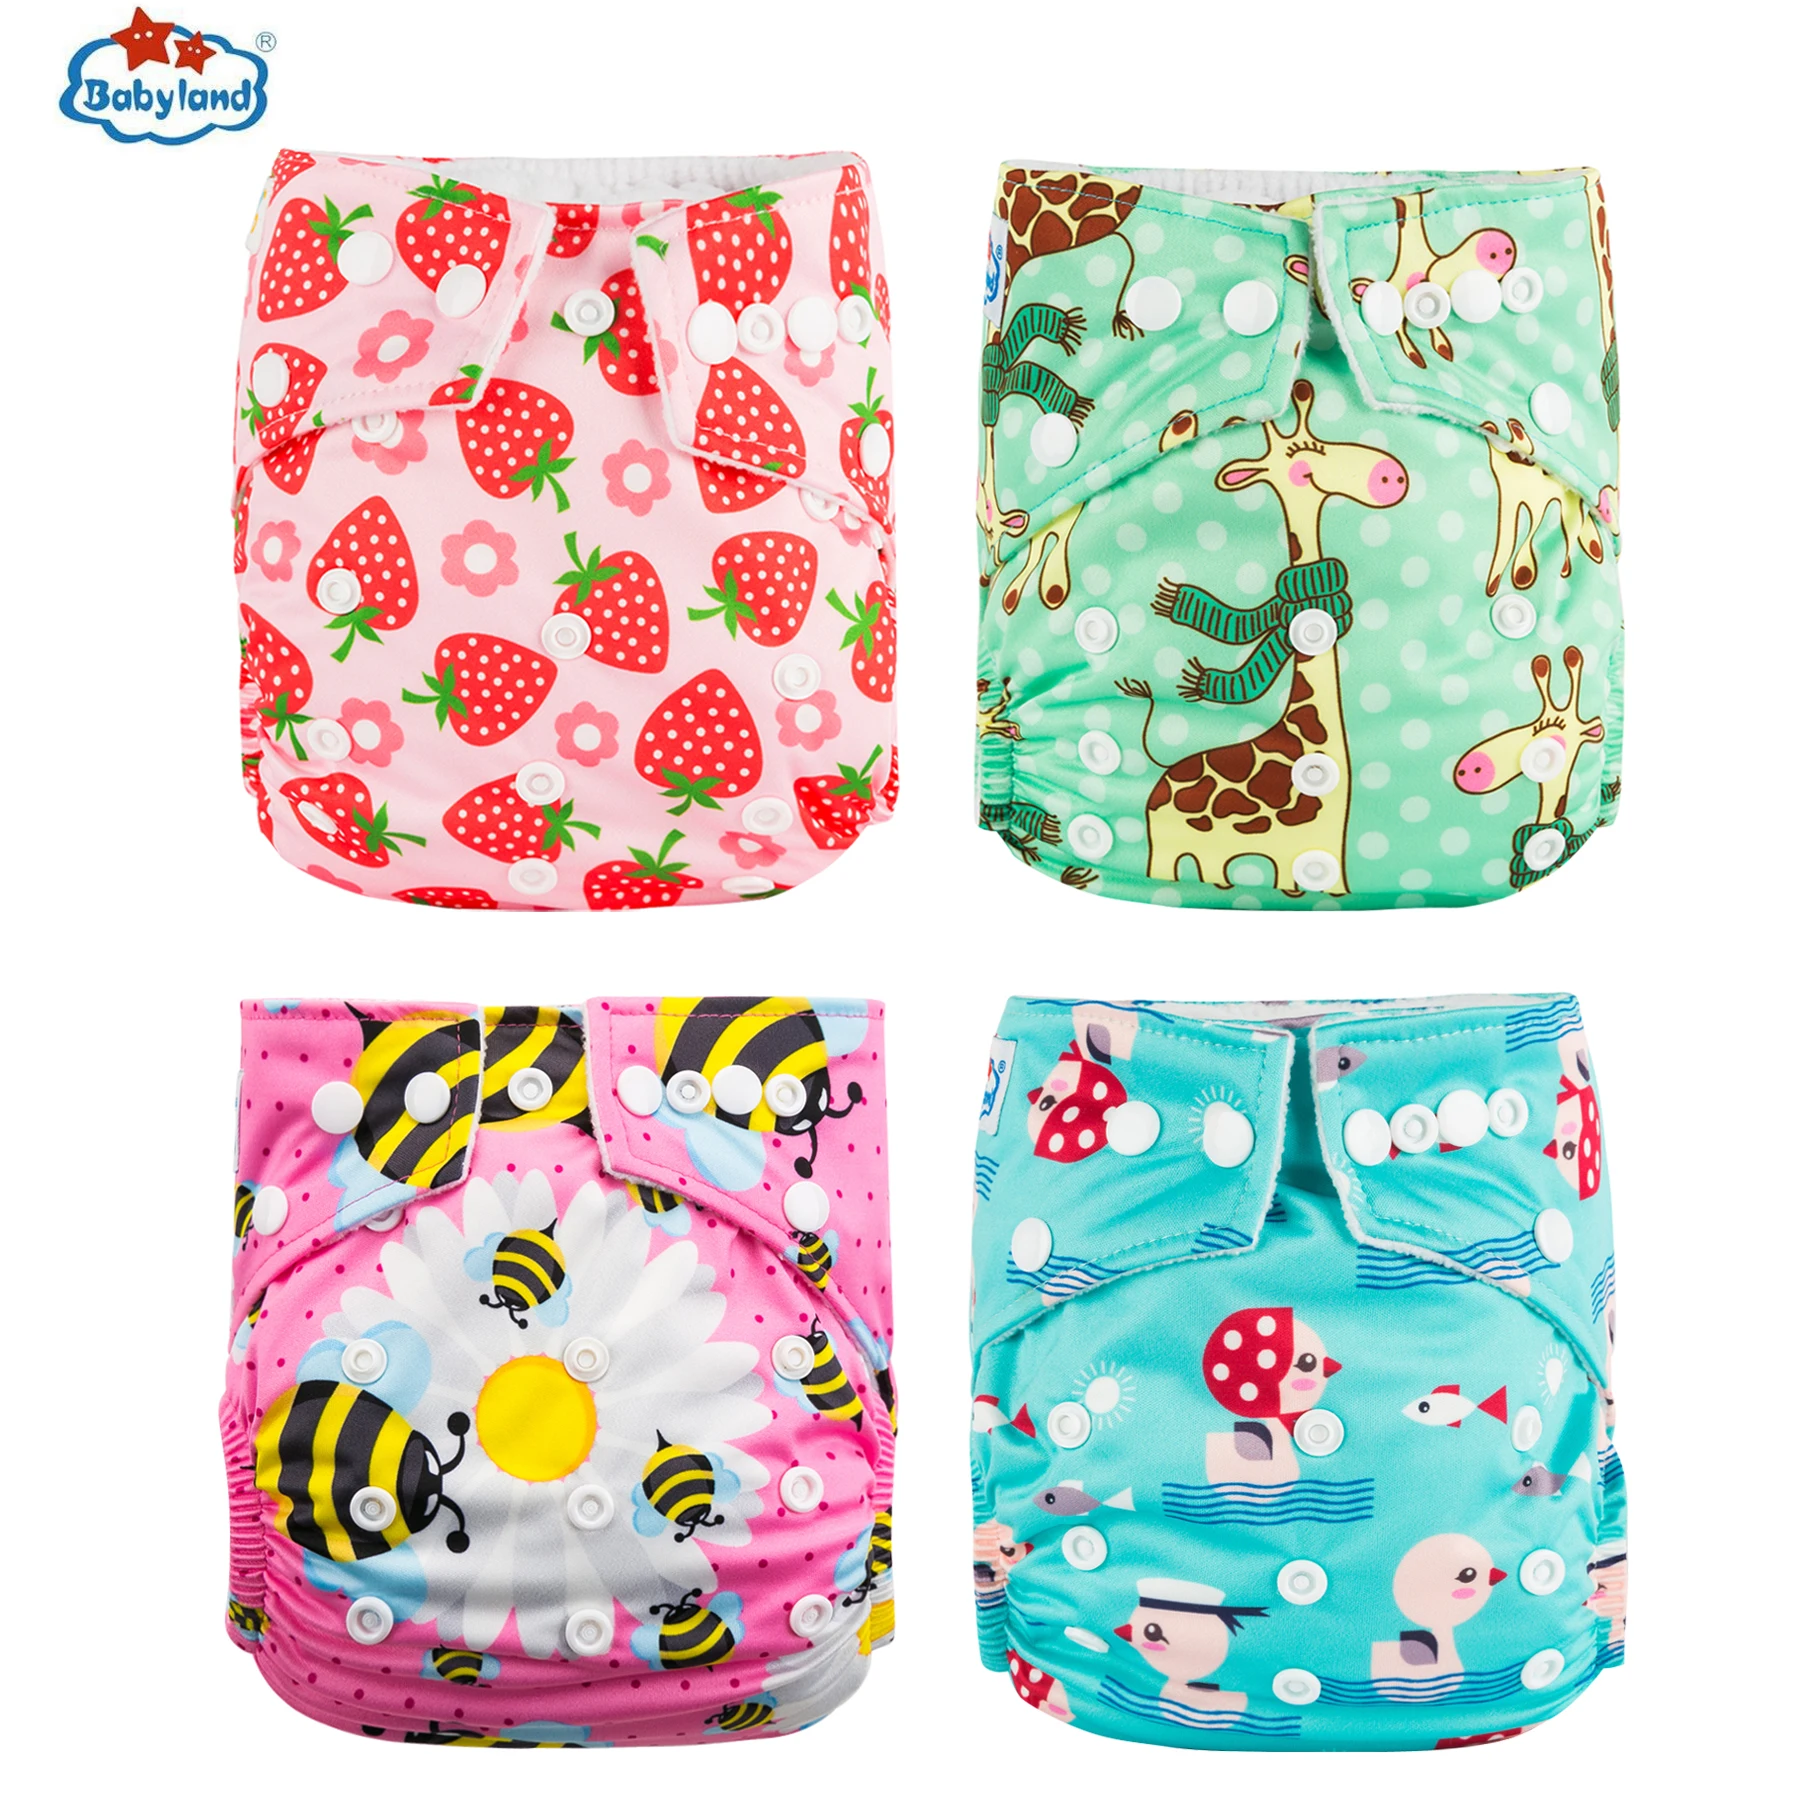 Babyland 4pcs/Set Baby Cloth Diaper Pocket Nappy Waterproof Diaper Covers Microfleece Inner Nappy Shell Adjustable Size 3-15KG